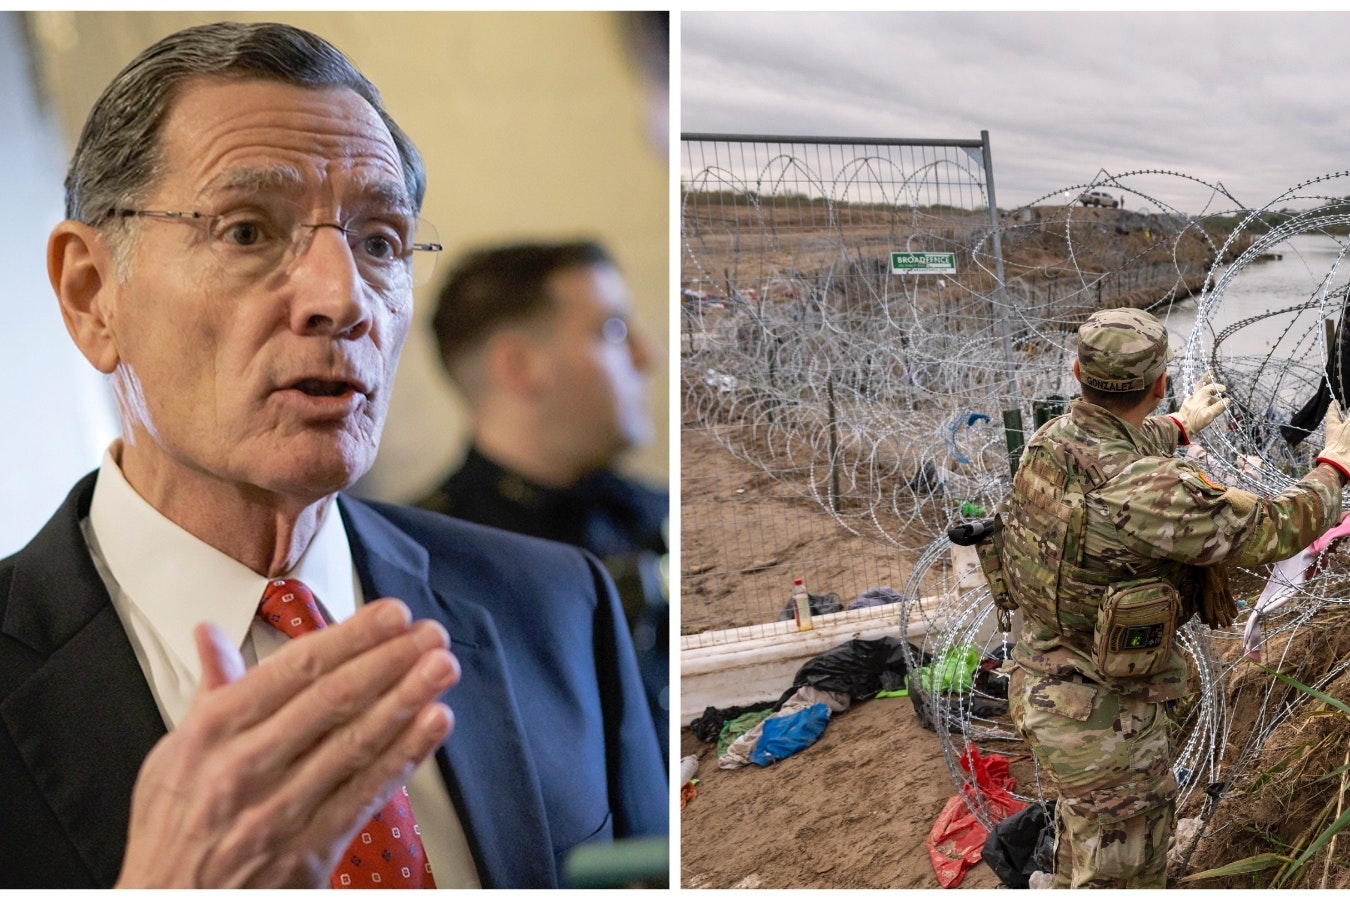 U.S. Sen. John Barrasso, R-Wyoming, voted against a controversial $95 billion foreign aid package because he said the U.S. needs to take care of securing its own borders before it gives billions to other countries to secure theirs.